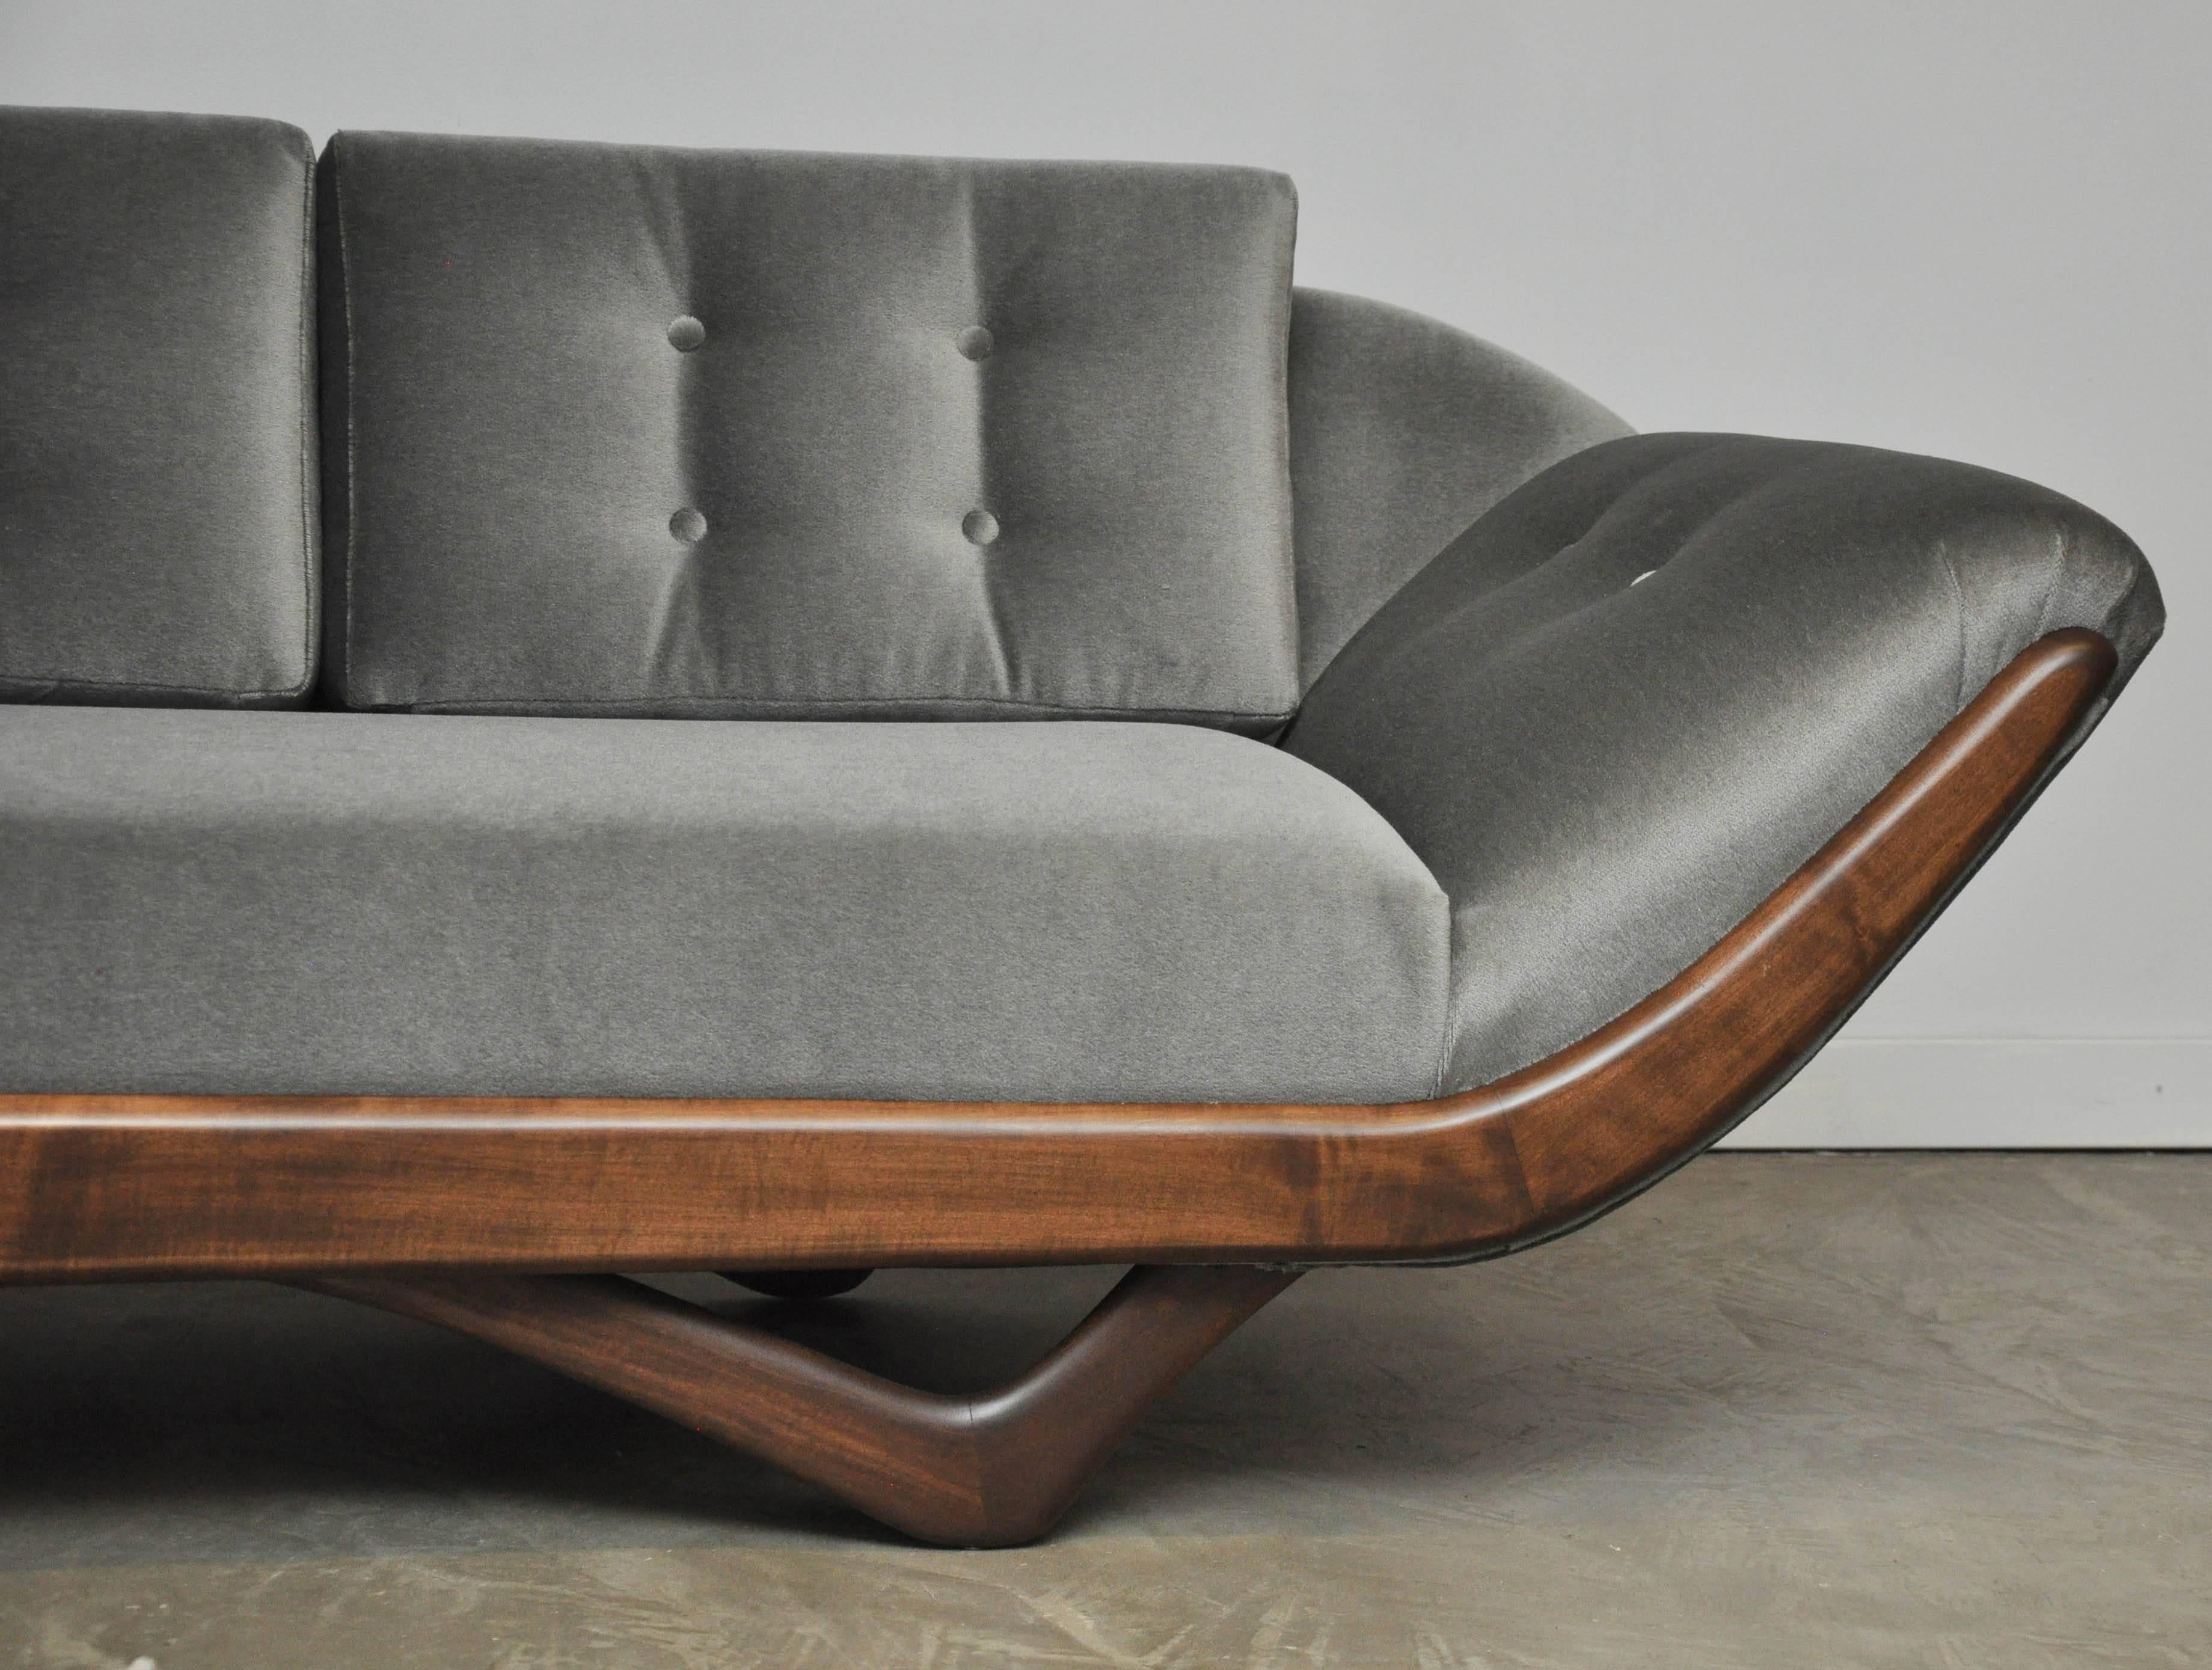 Gondola sofa by Adrian Pearsall. Beautiful sculptural form. Fully restored walnut frame. Newly upholstered in grey mohair.
 